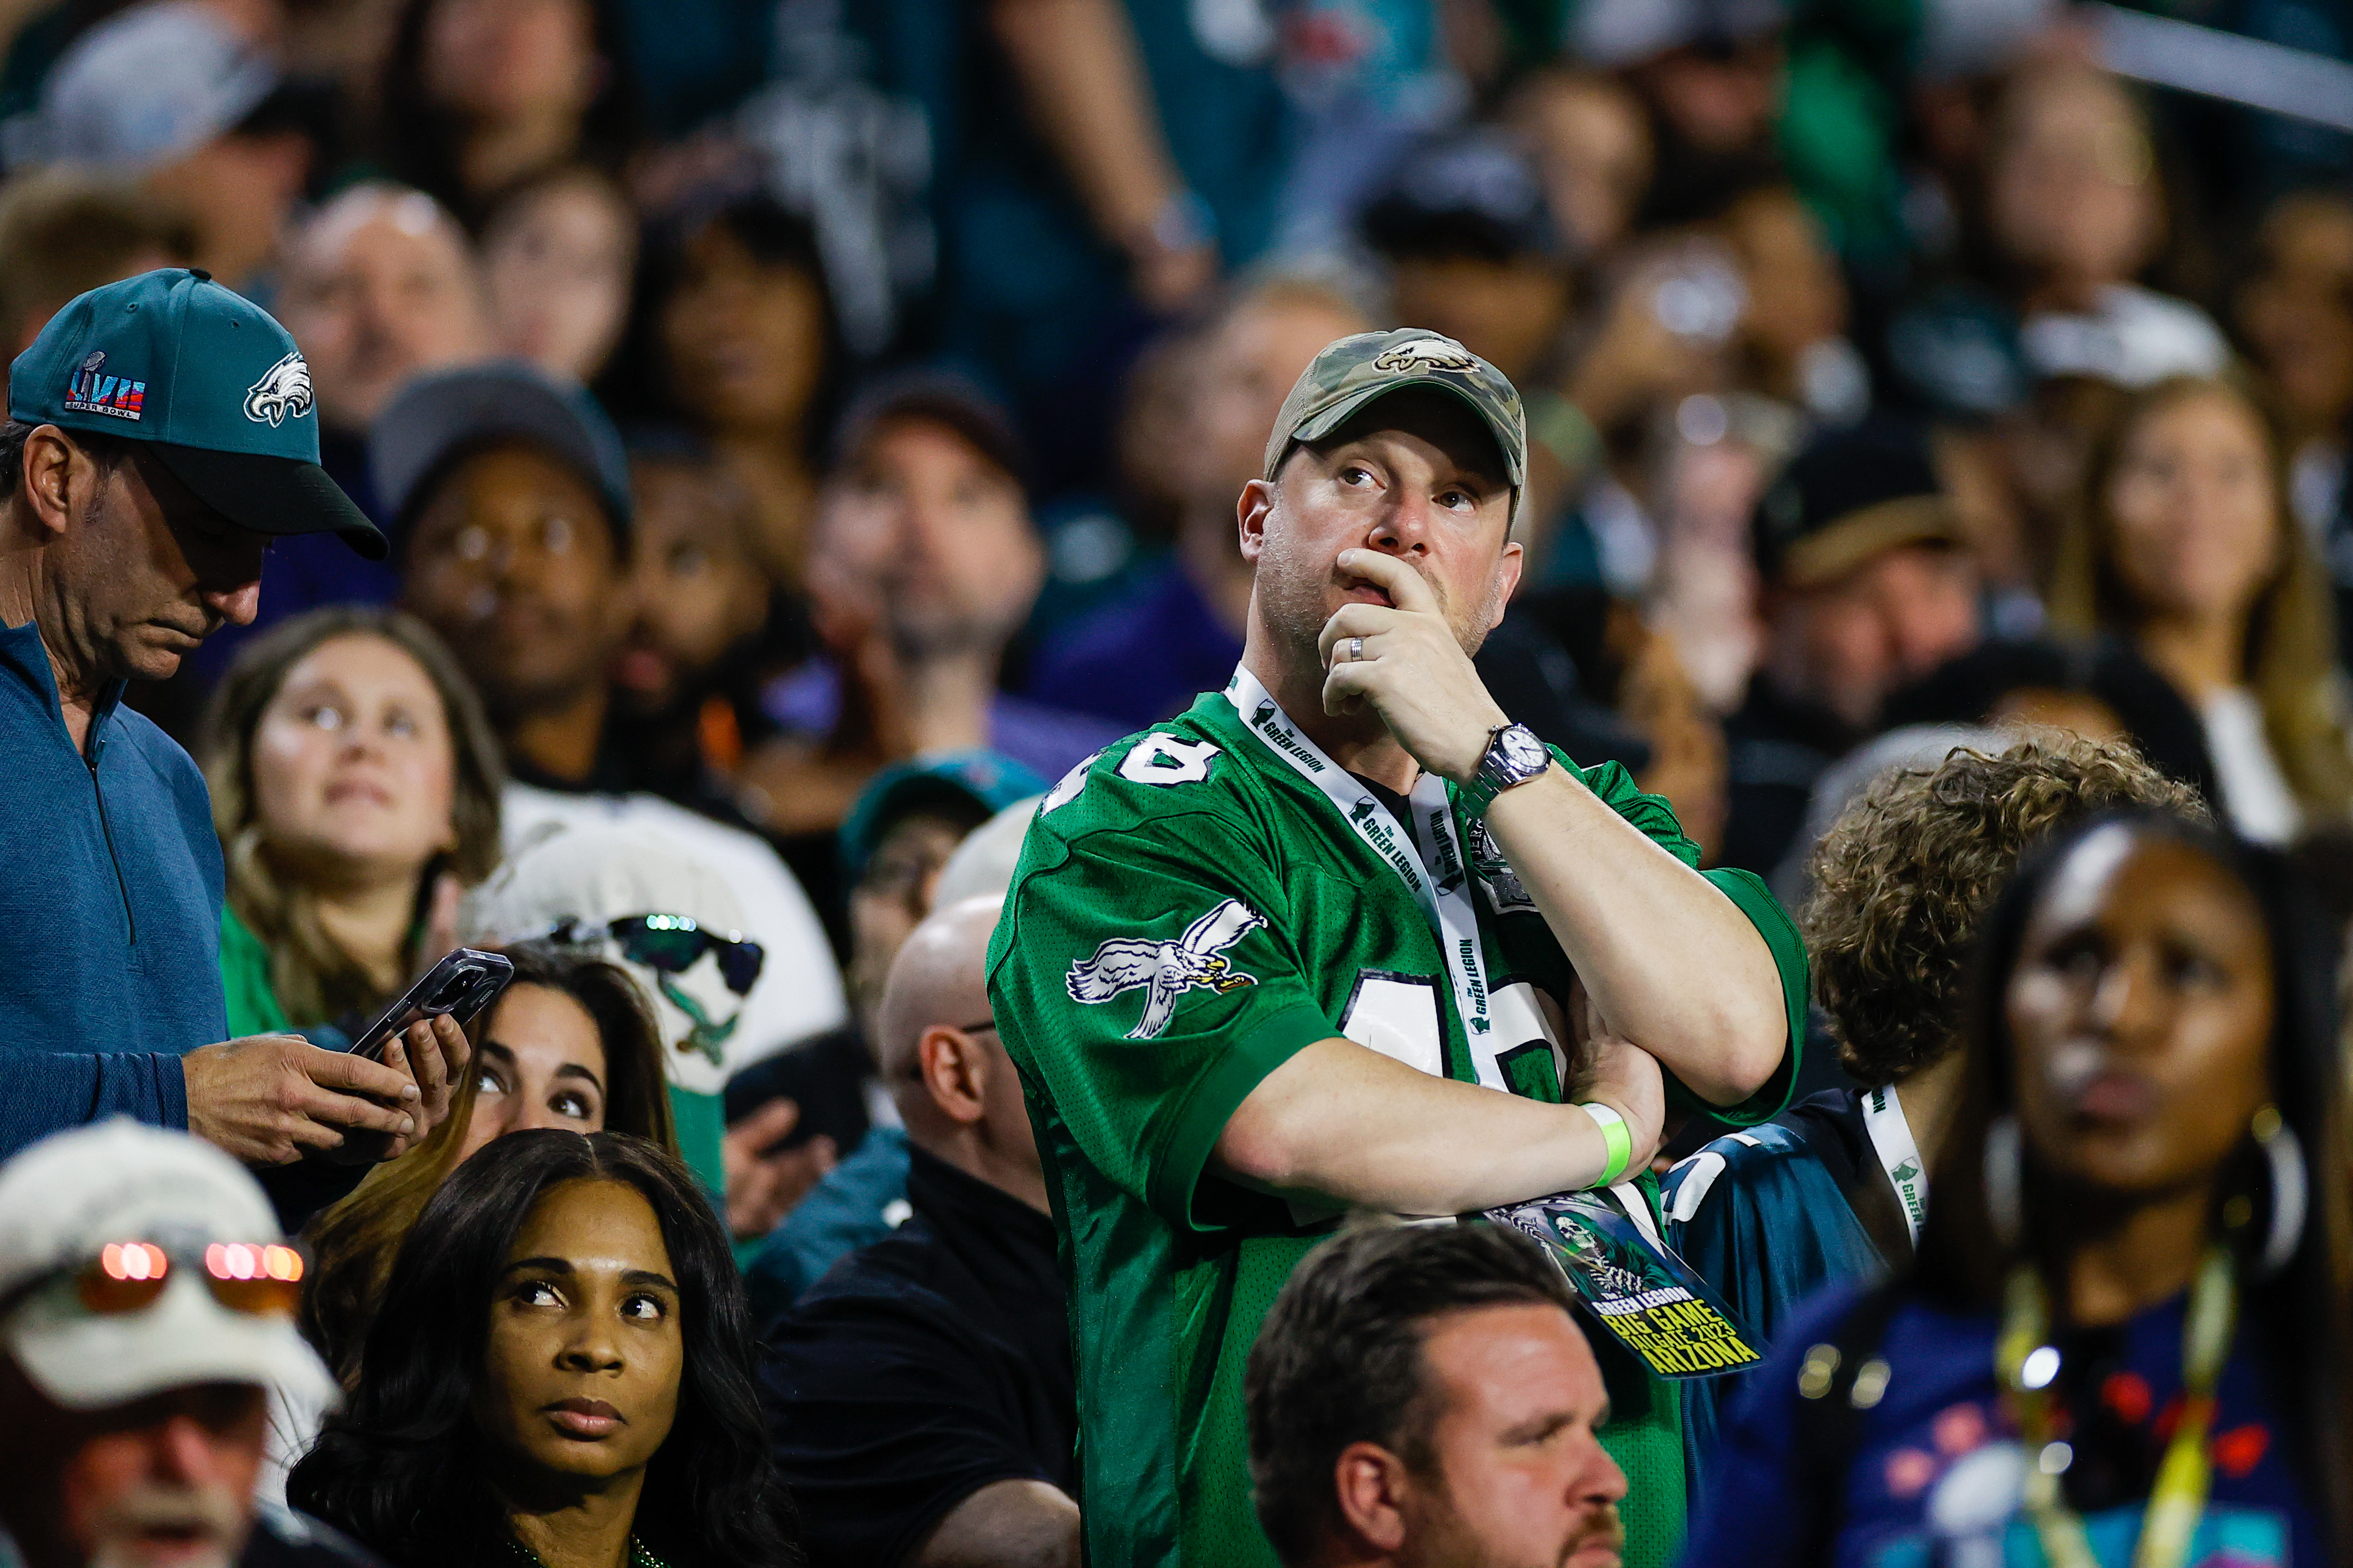 SB Nation Reacts: Most fans believe Eagles will win Super Bowl - Silver And  Black Pride